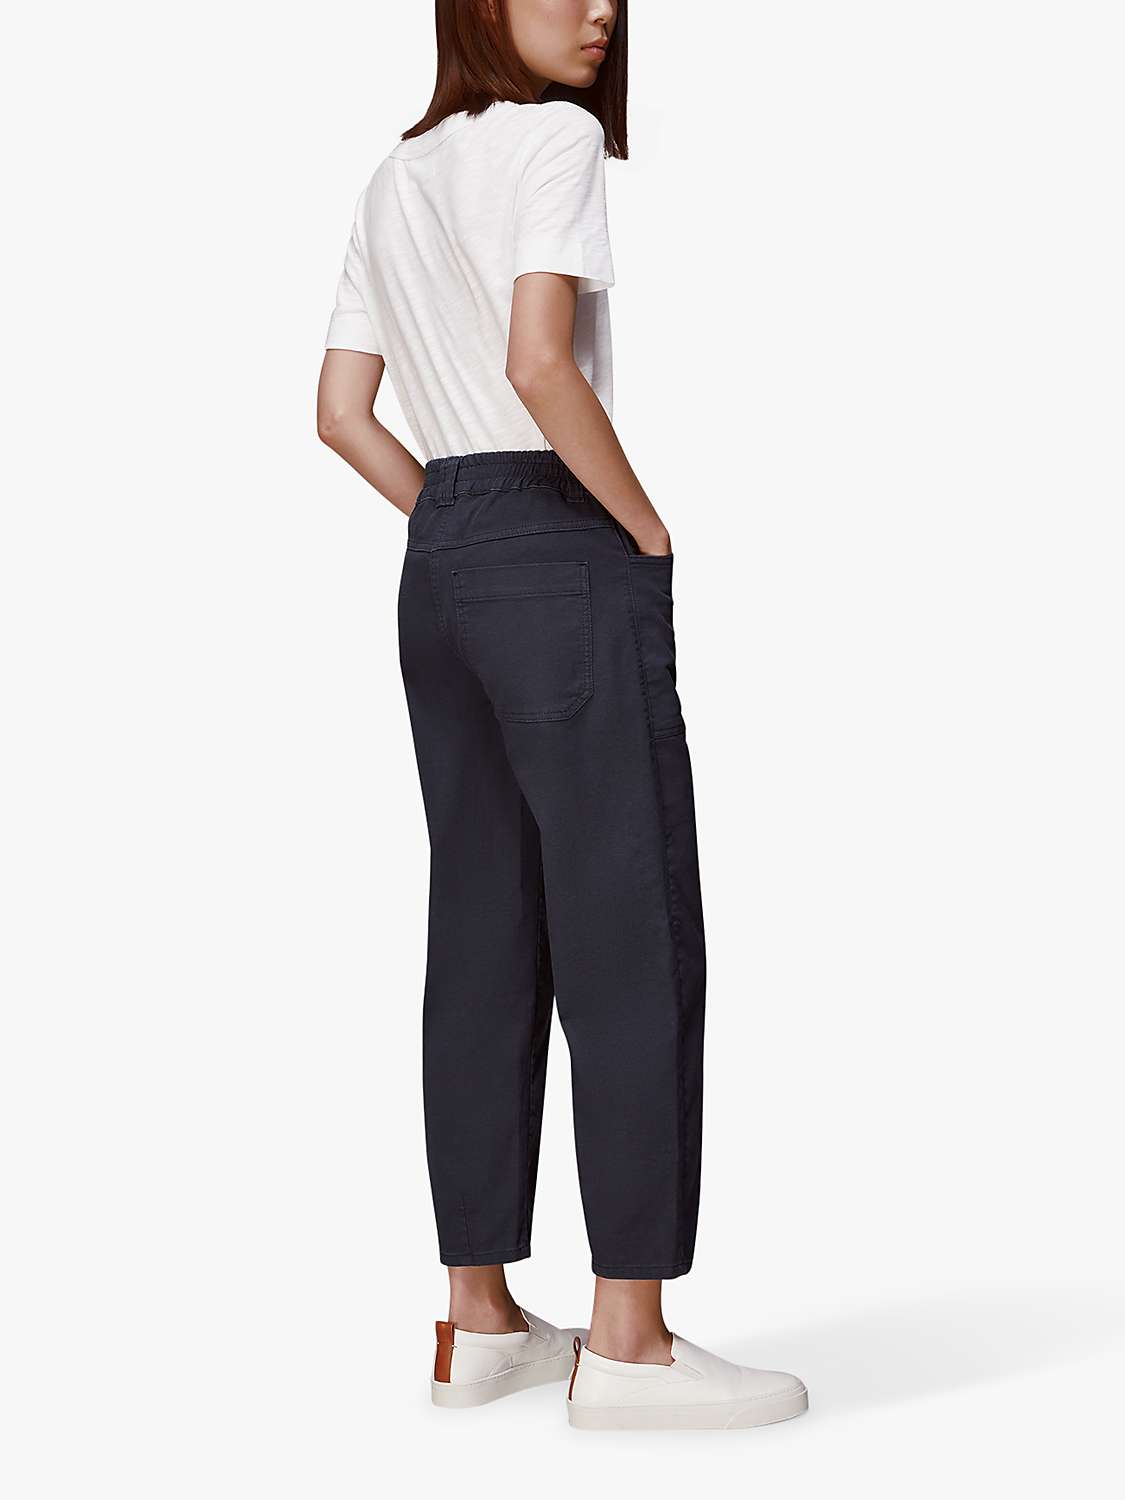 Buy Whistles Tessa Casual Trousers, Navy Online at johnlewis.com